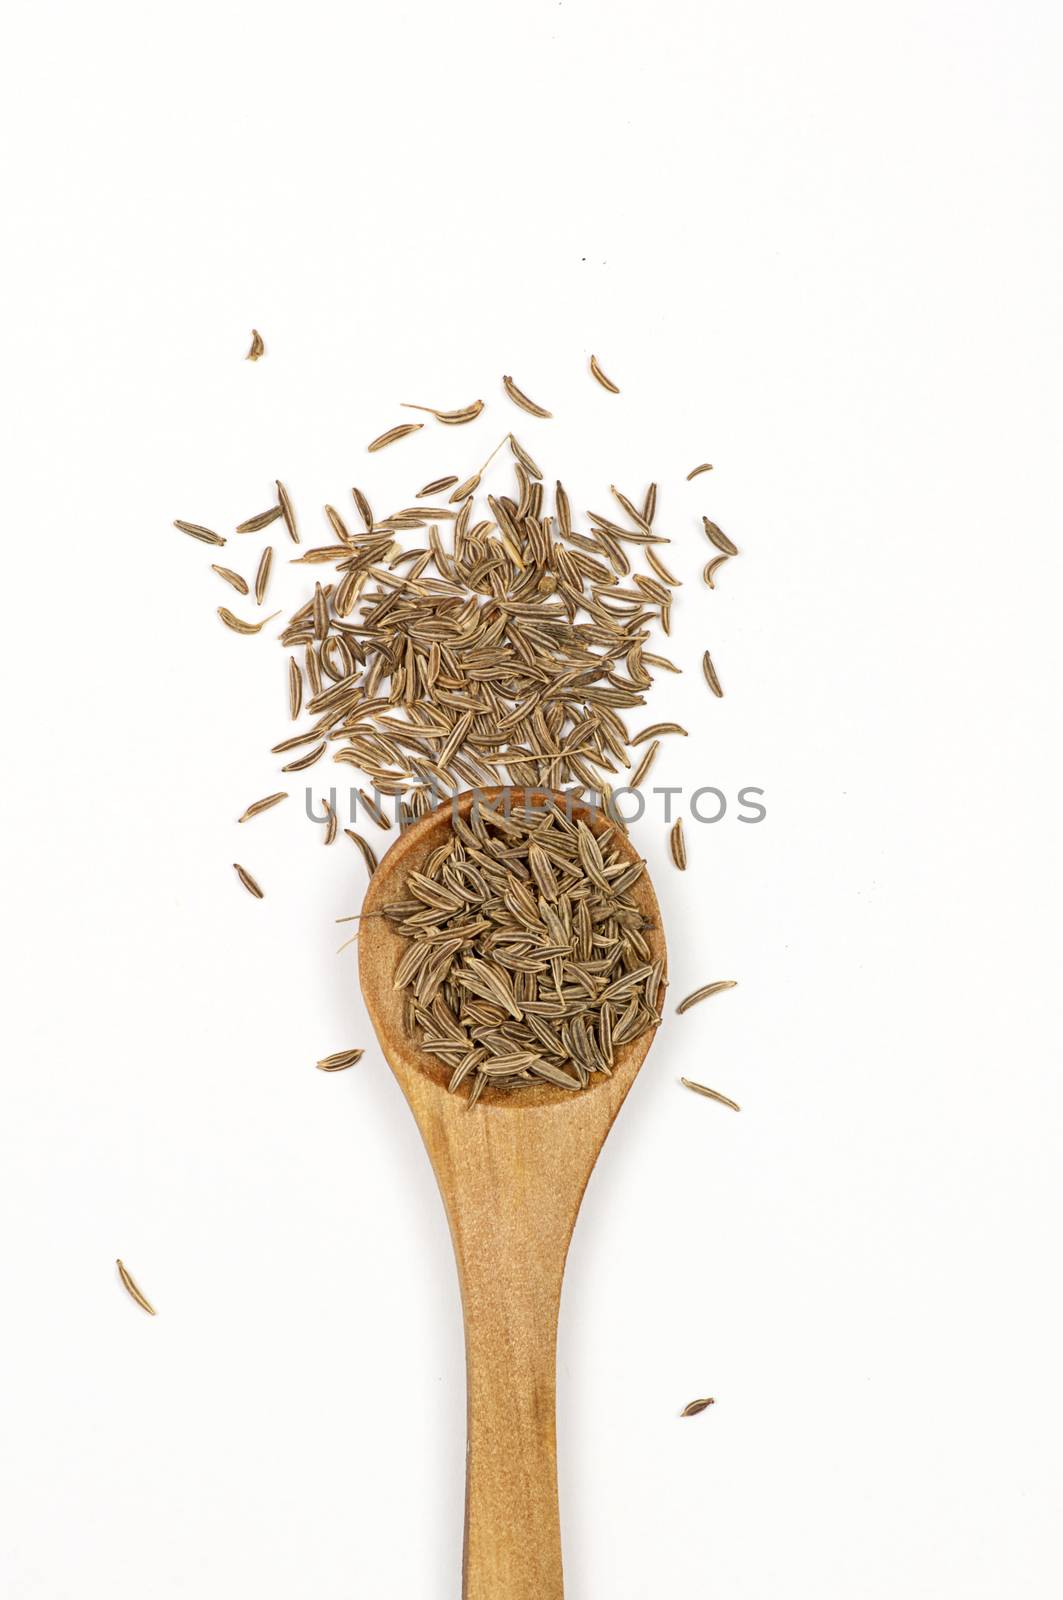 Caraway (Carum carvi) seeds close up isolated on white